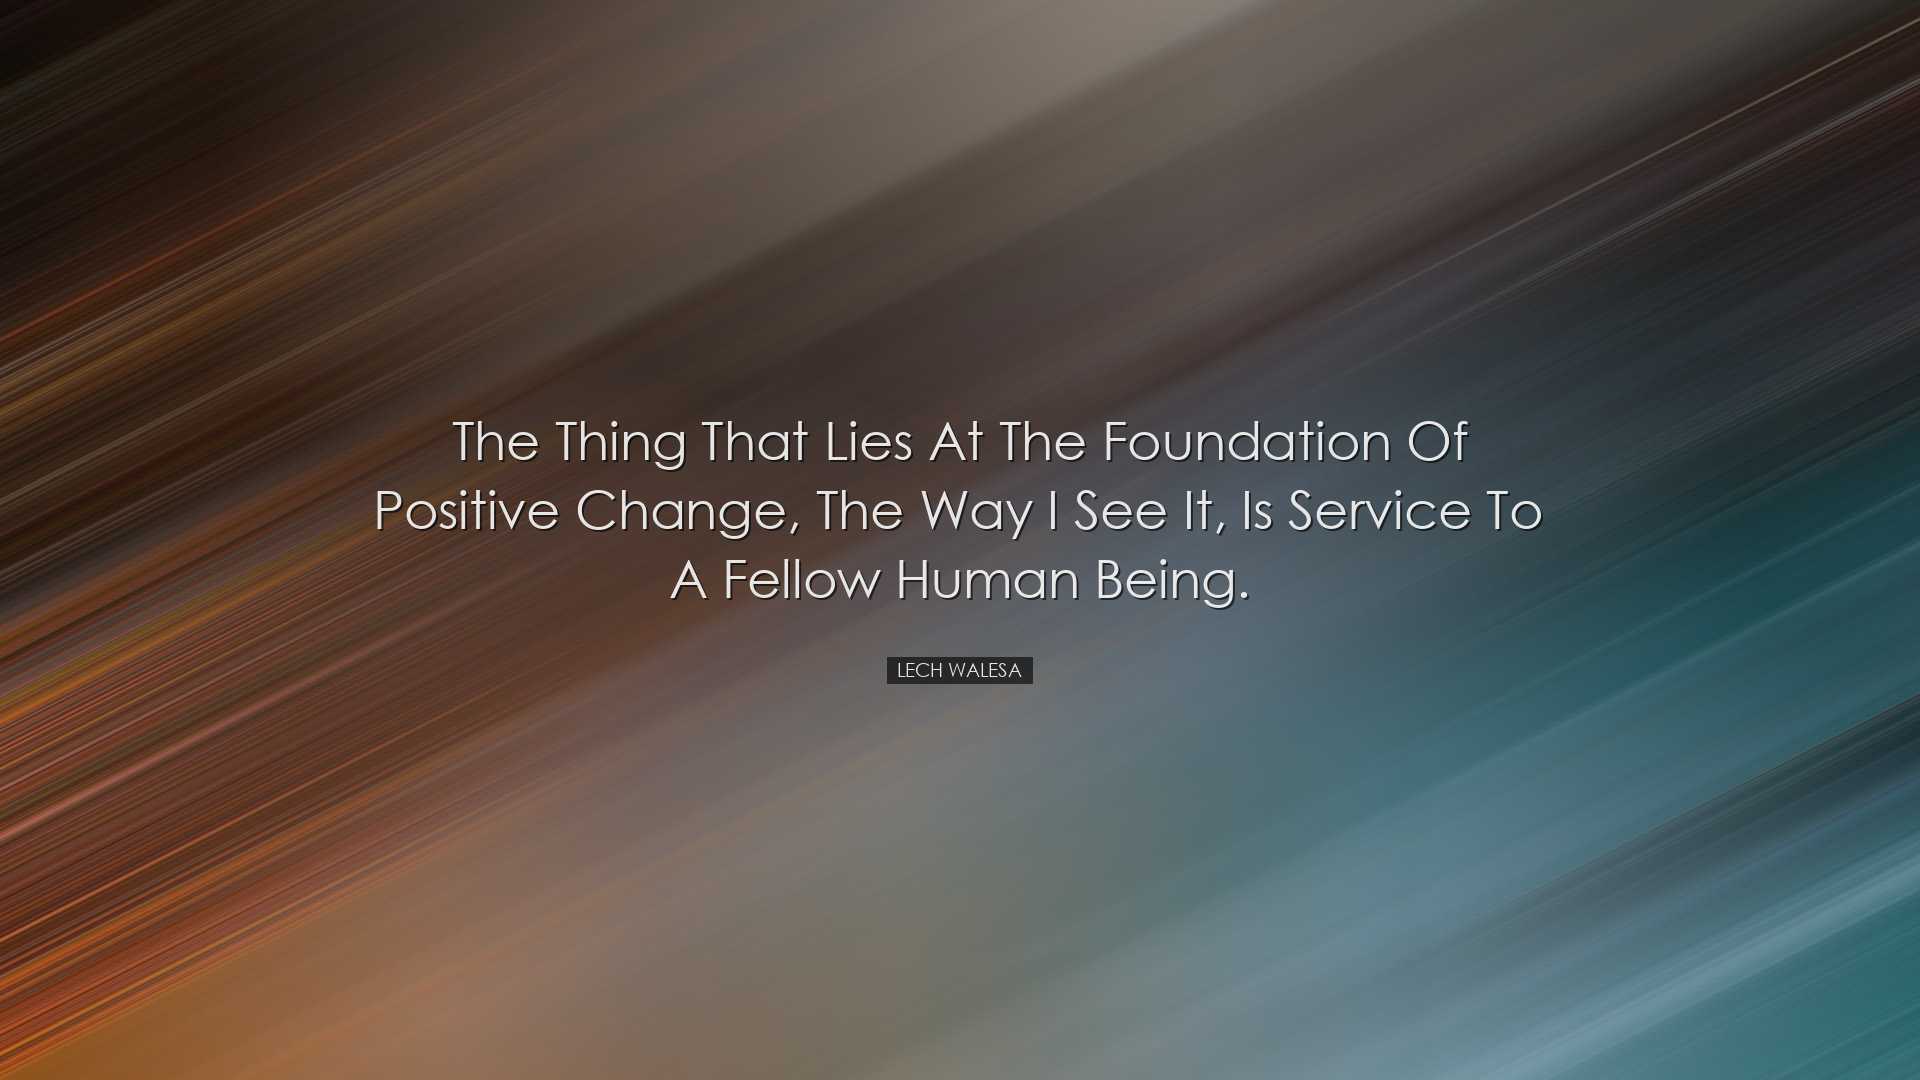 The thing that lies at the foundation of positive change, the way